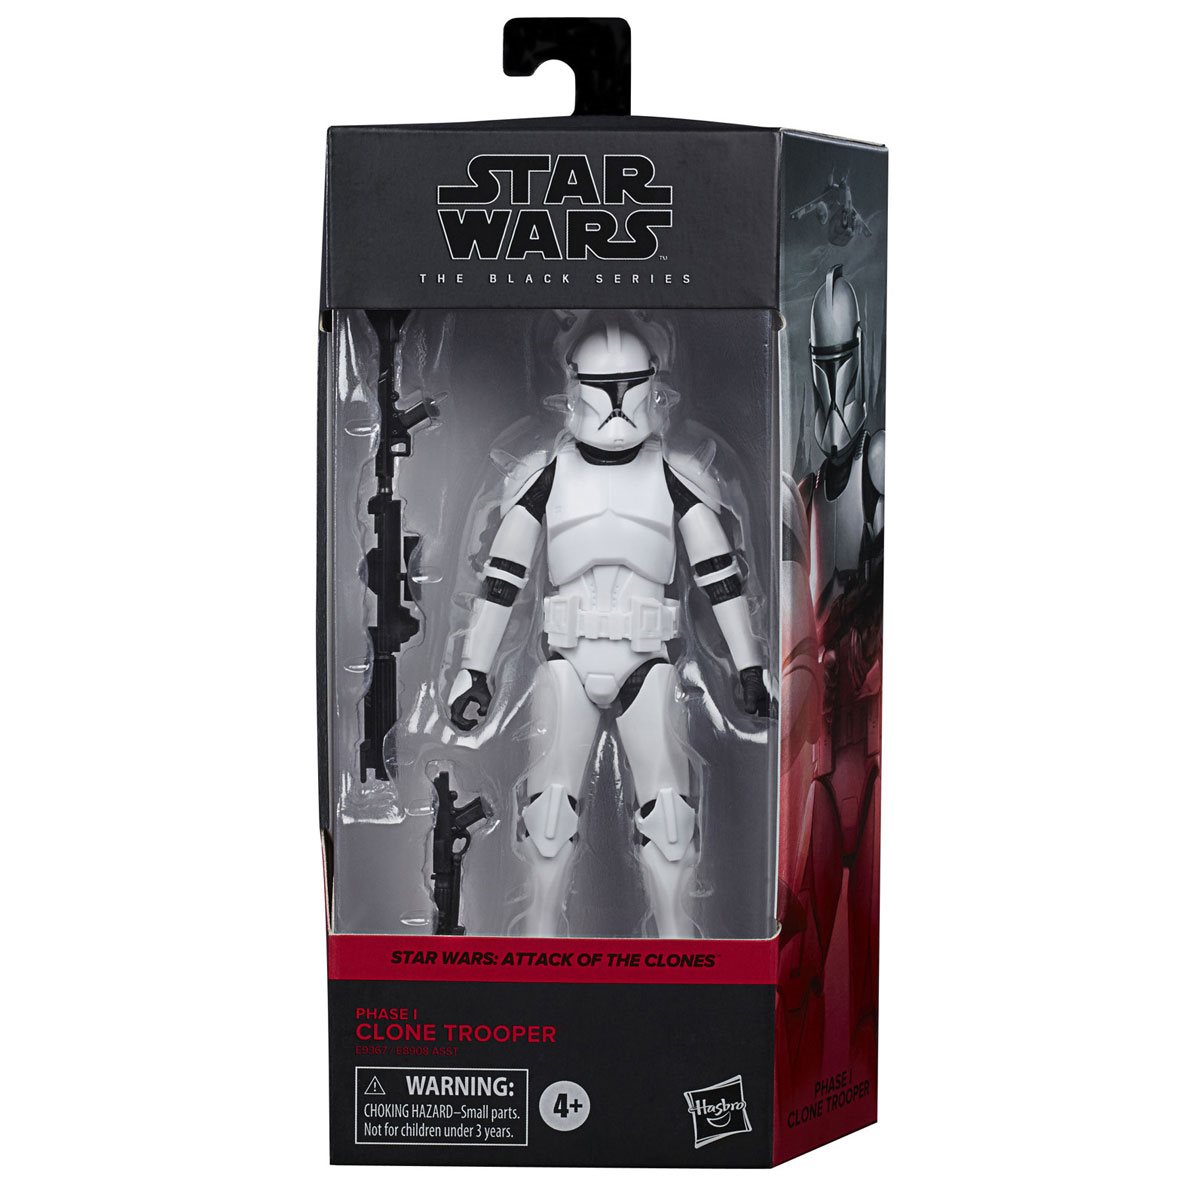 Star Wars Black Series 6" Action Figure new,but without box clone trooper A60K 